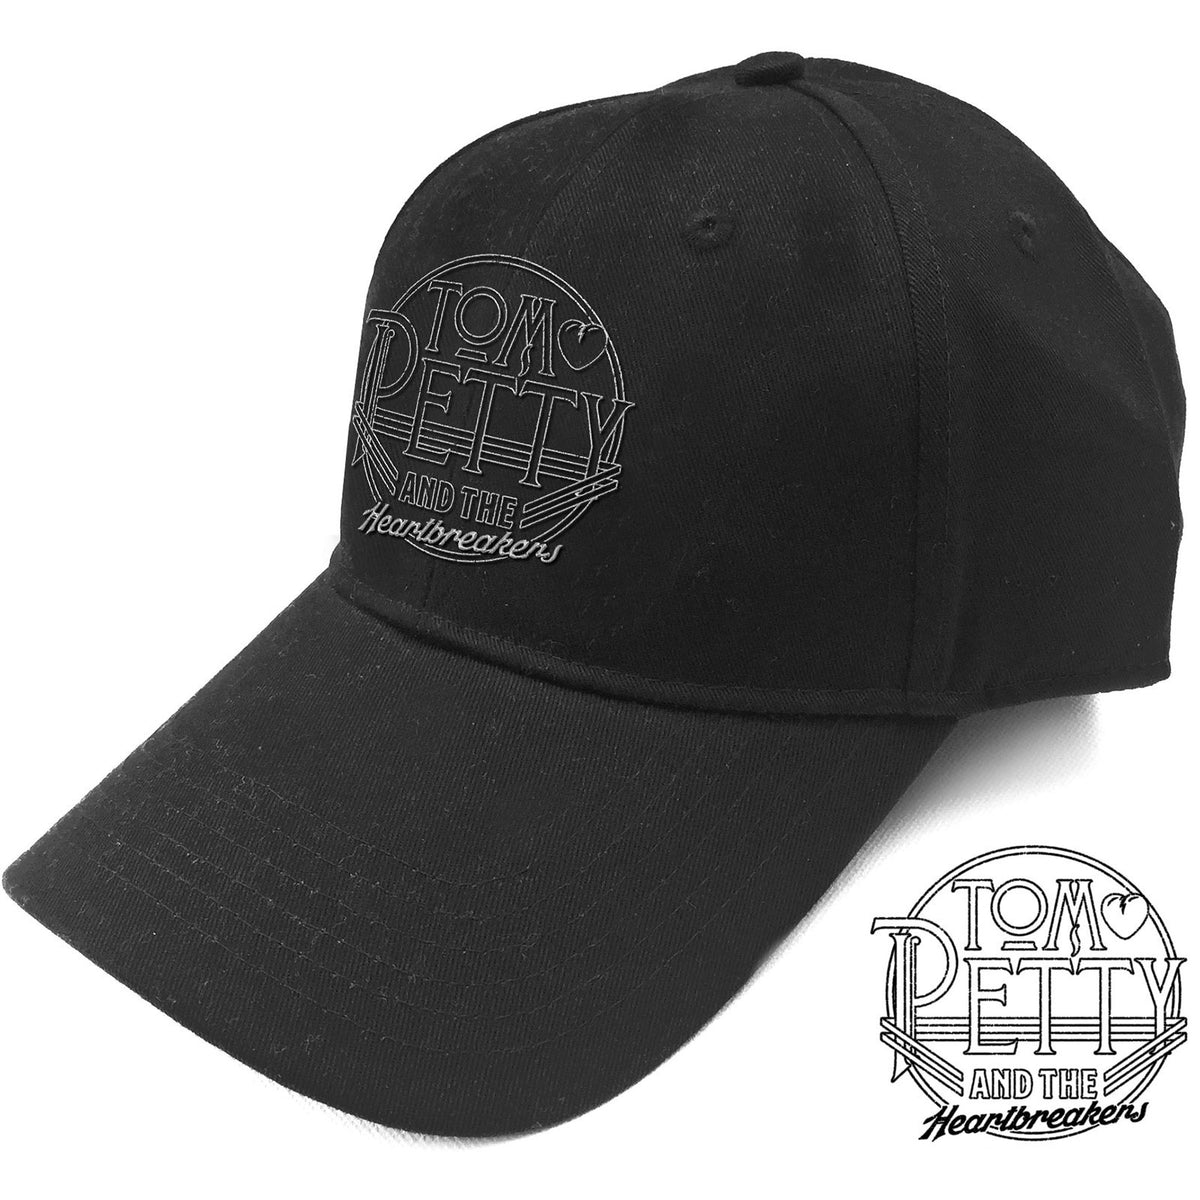 Tom Petty & the Heartbreakers Baseball Cap - Circle Logo - Official Product